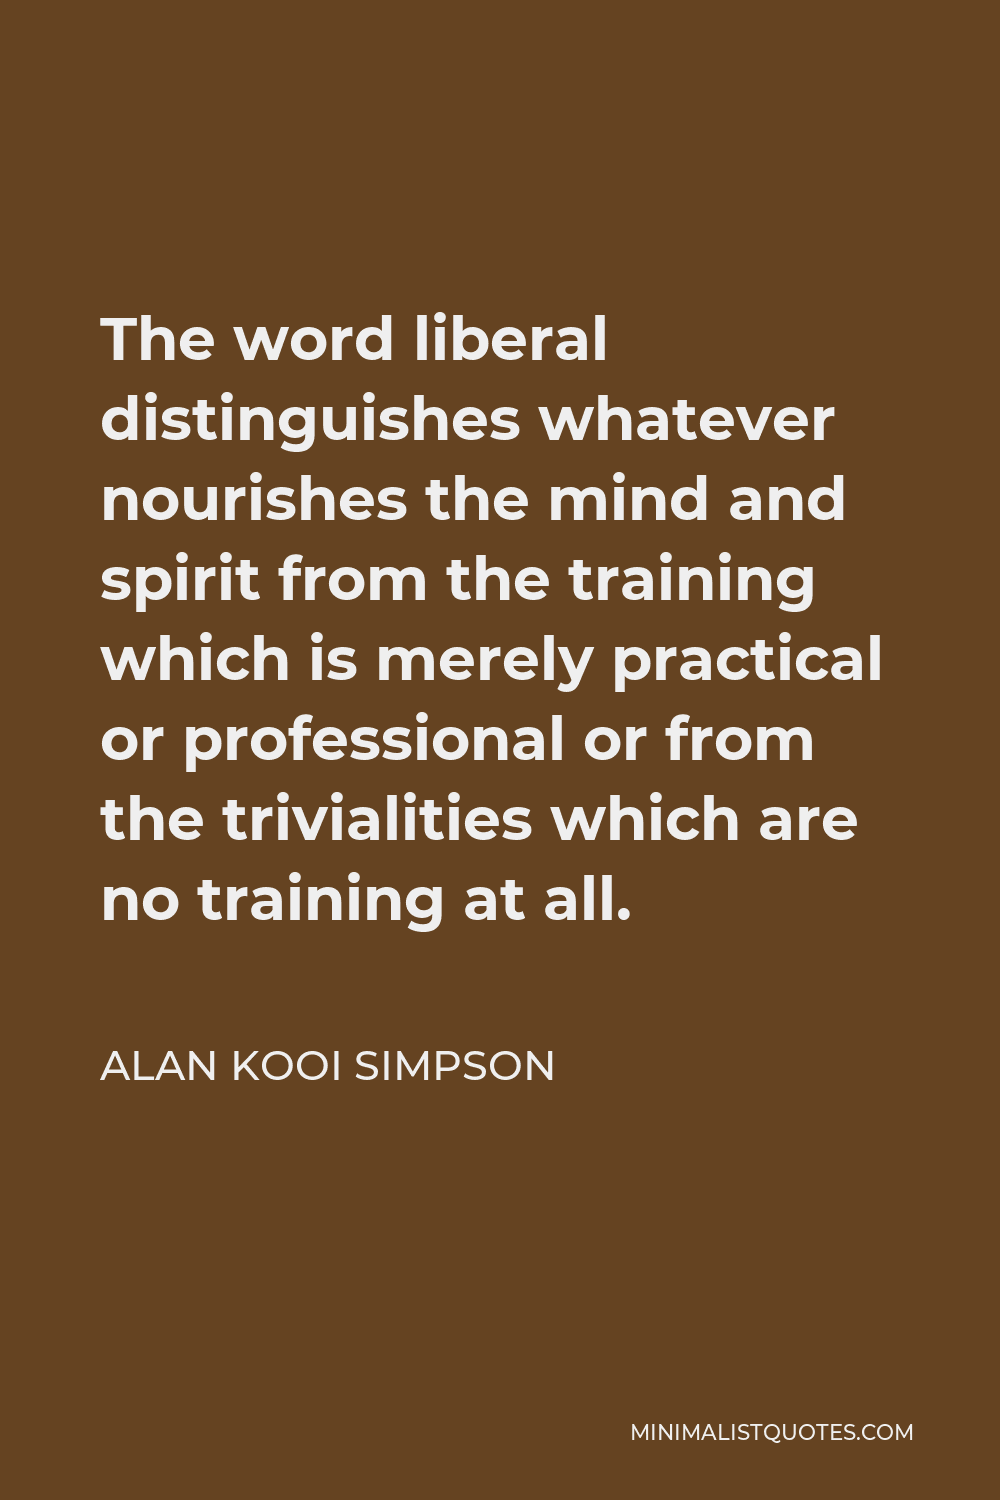 Alan Kooi Simpson Quote - The word liberal distinguishes whatever nourishes the mind and spirit from the training which is merely practical or professional or from the trivialities which are no training at all.